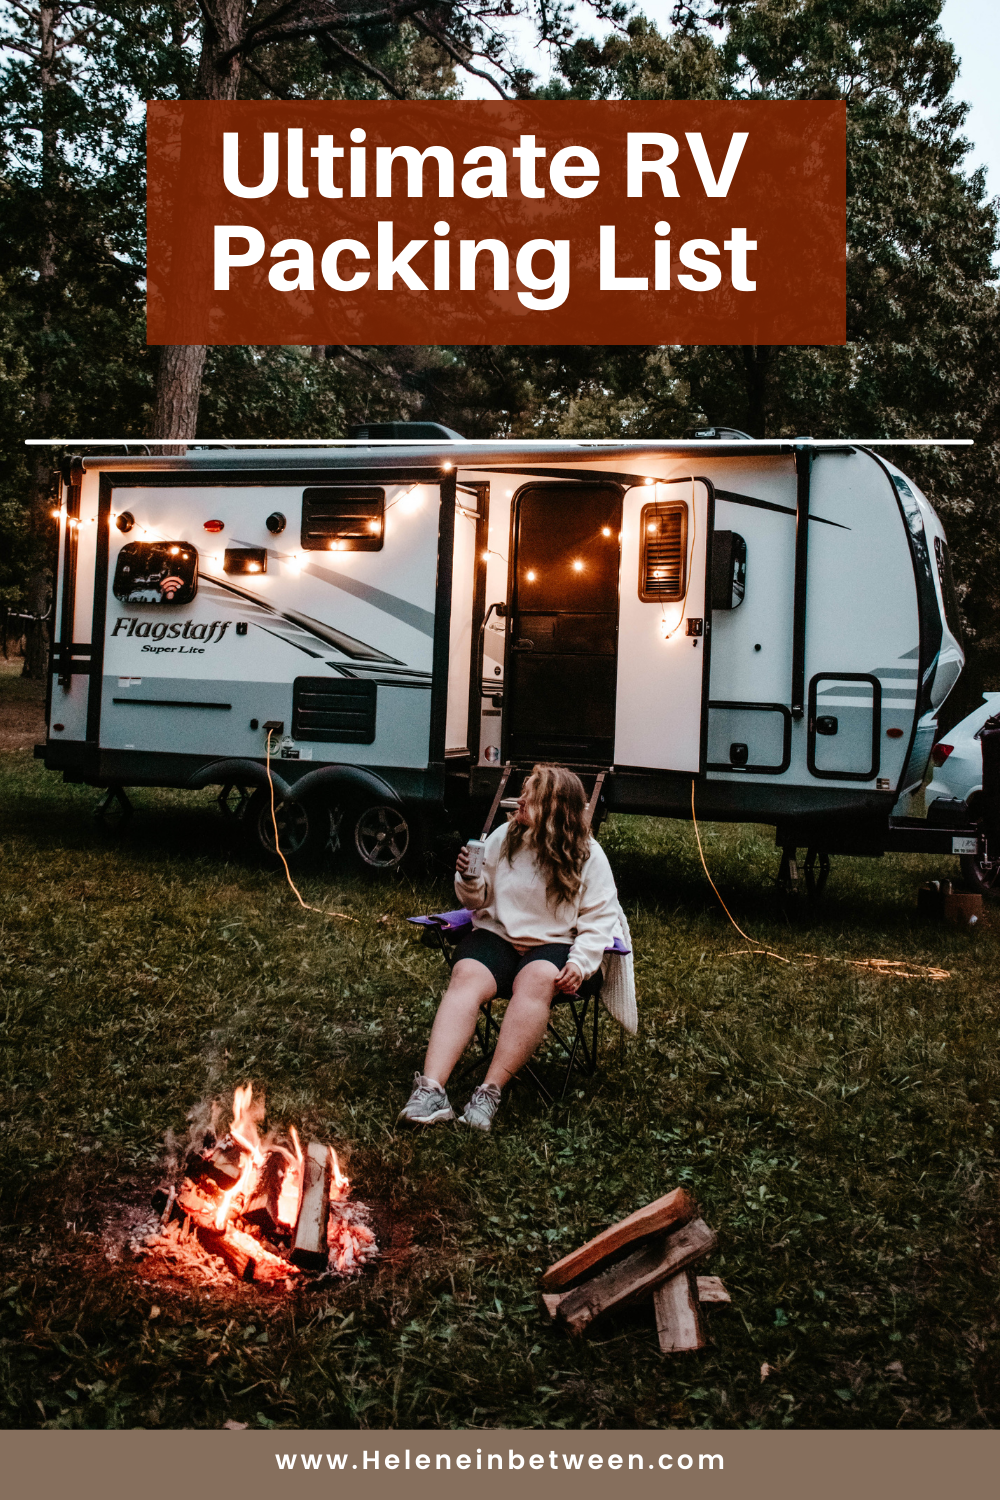 https://heleneinbetween.com/wp-content/uploads/2021/08/the-ultimate-rv-packing-list-pin.png